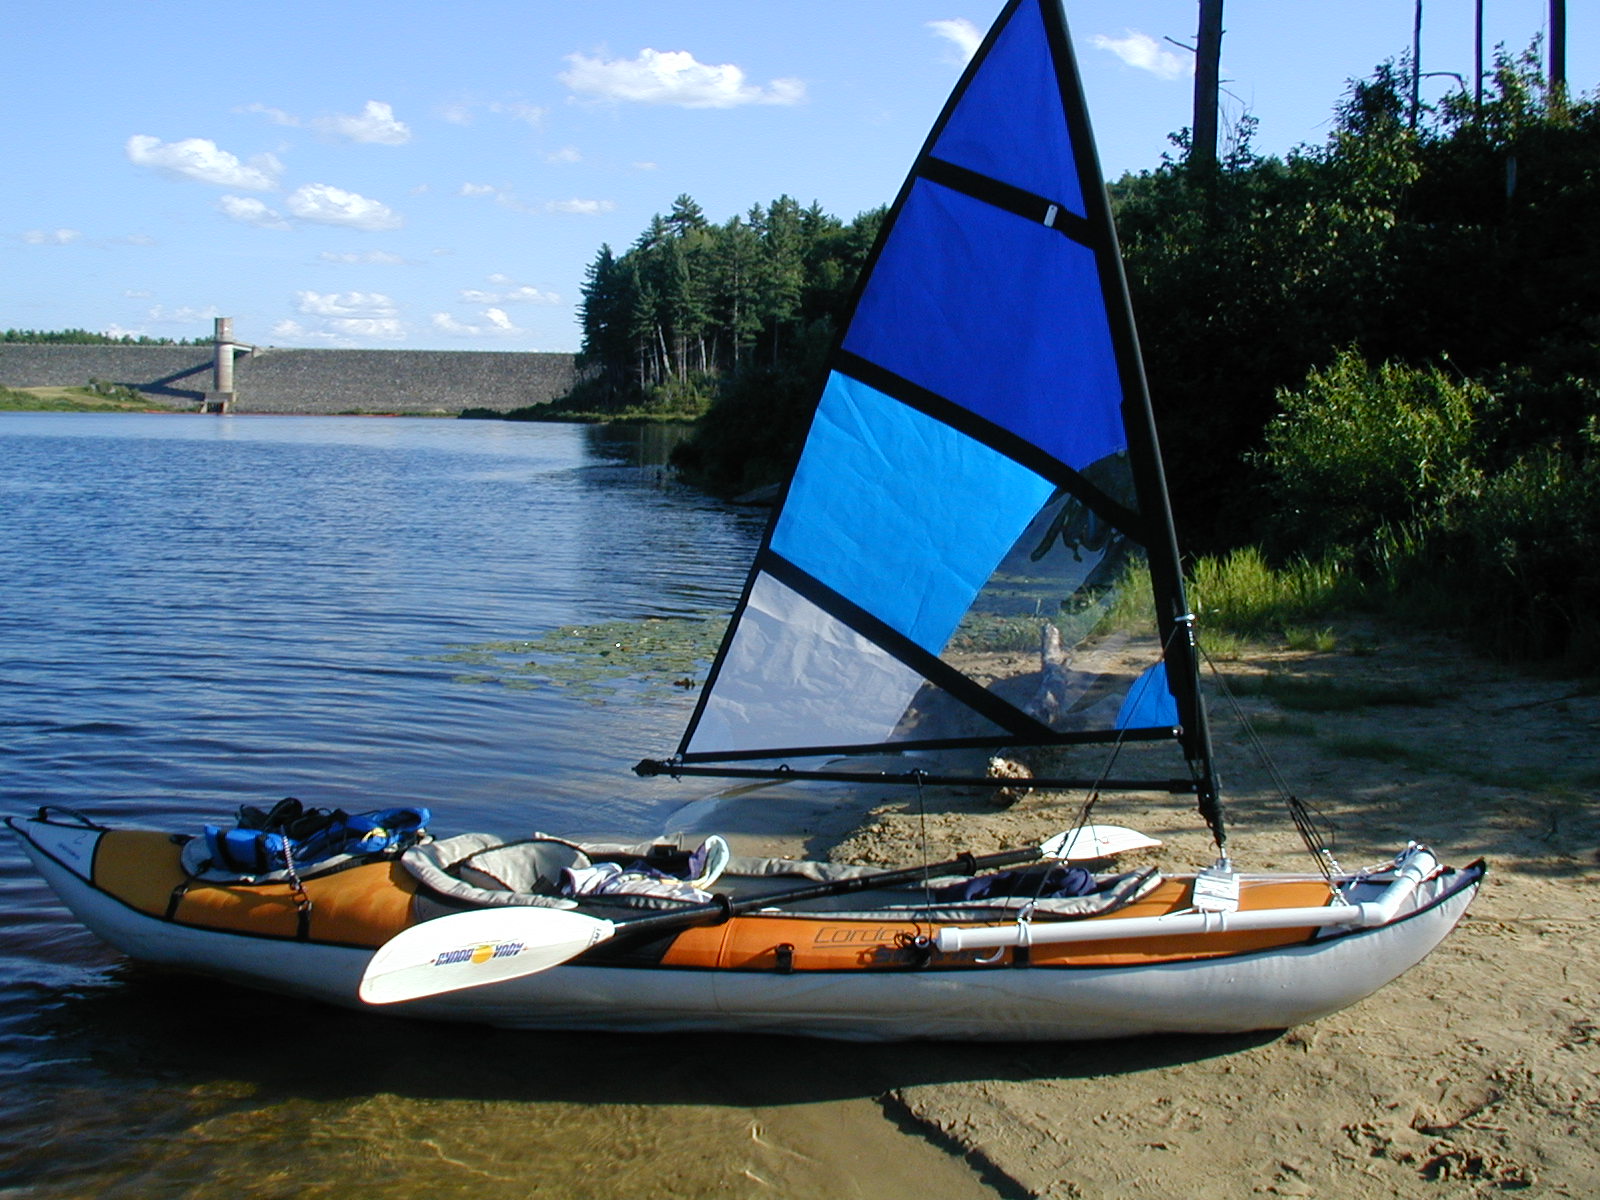 Questions about Kayak Sailing